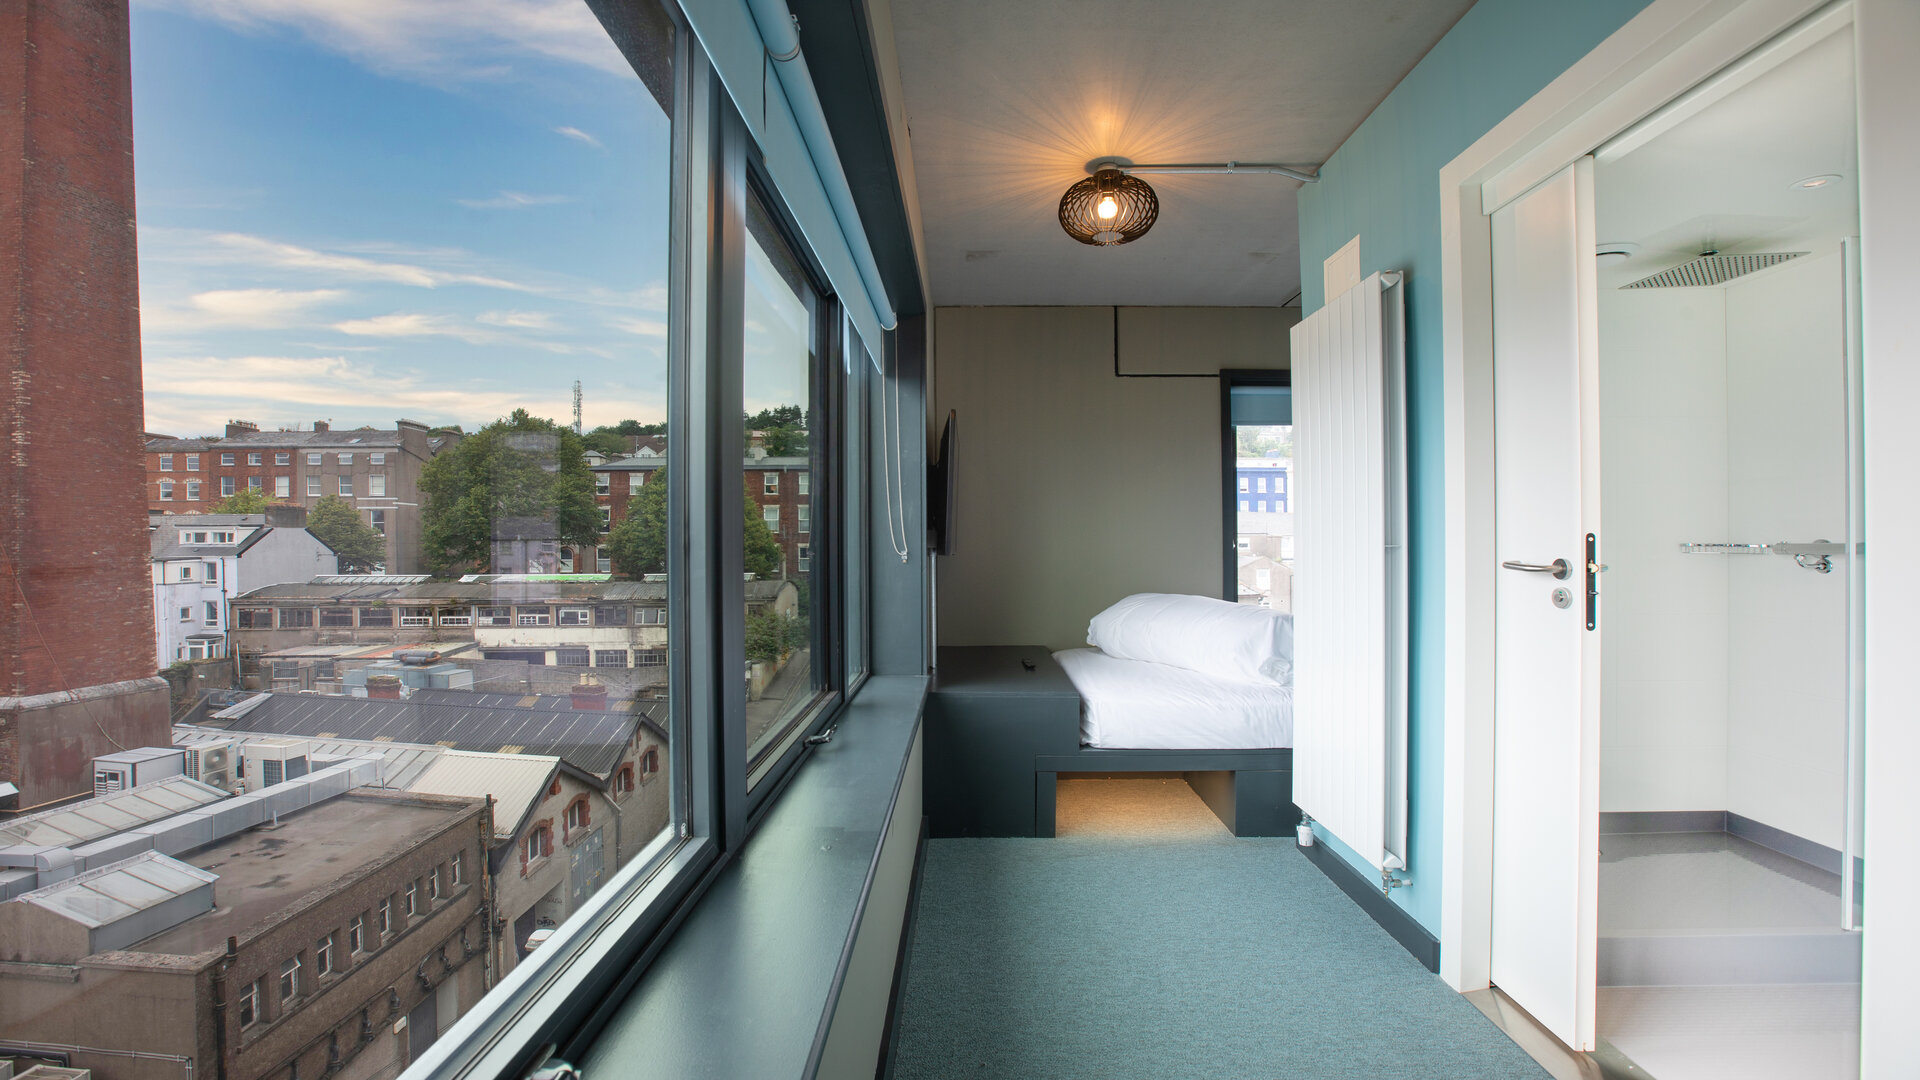 Good Things Come In Small Packages – REZz Hotel Opens Architecture Ireland, Urban Design, Dublin/Cork/Kerry Architecture